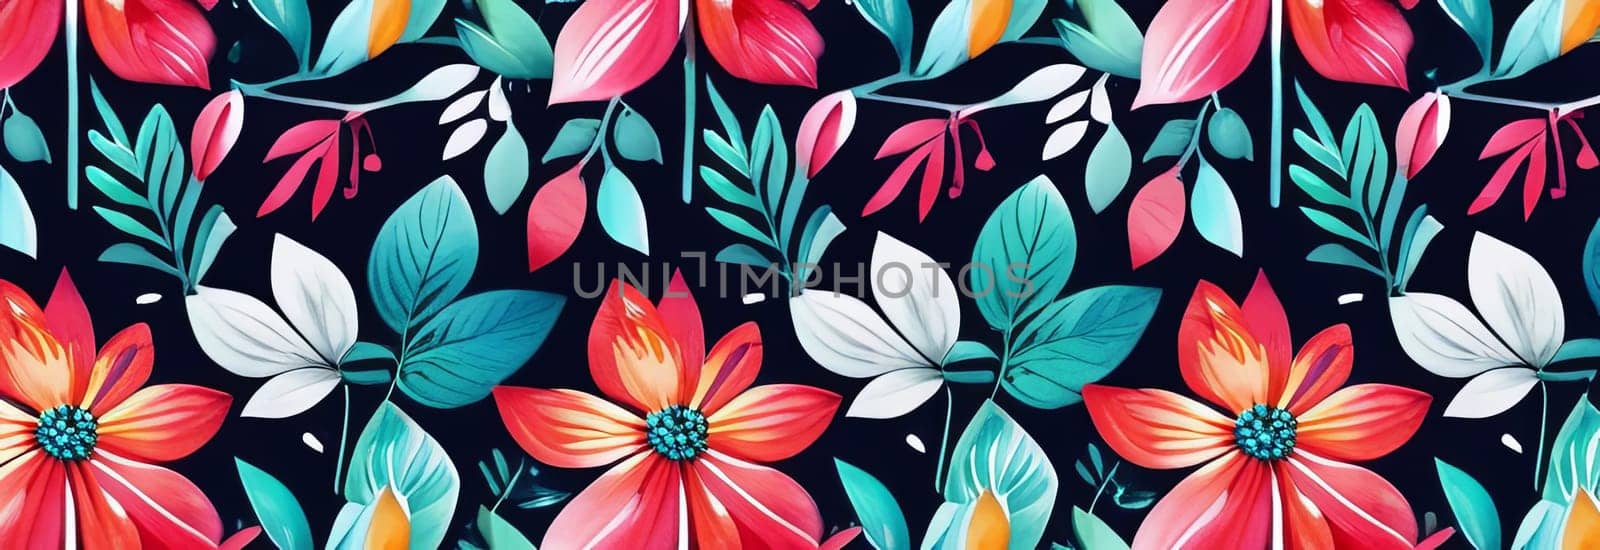 Vibrant colorful flowers set against dark background. For meditation apps, on covers of books about spiritual growth, in designs for yoga studios, spa salons, illustration for articles on inner peace